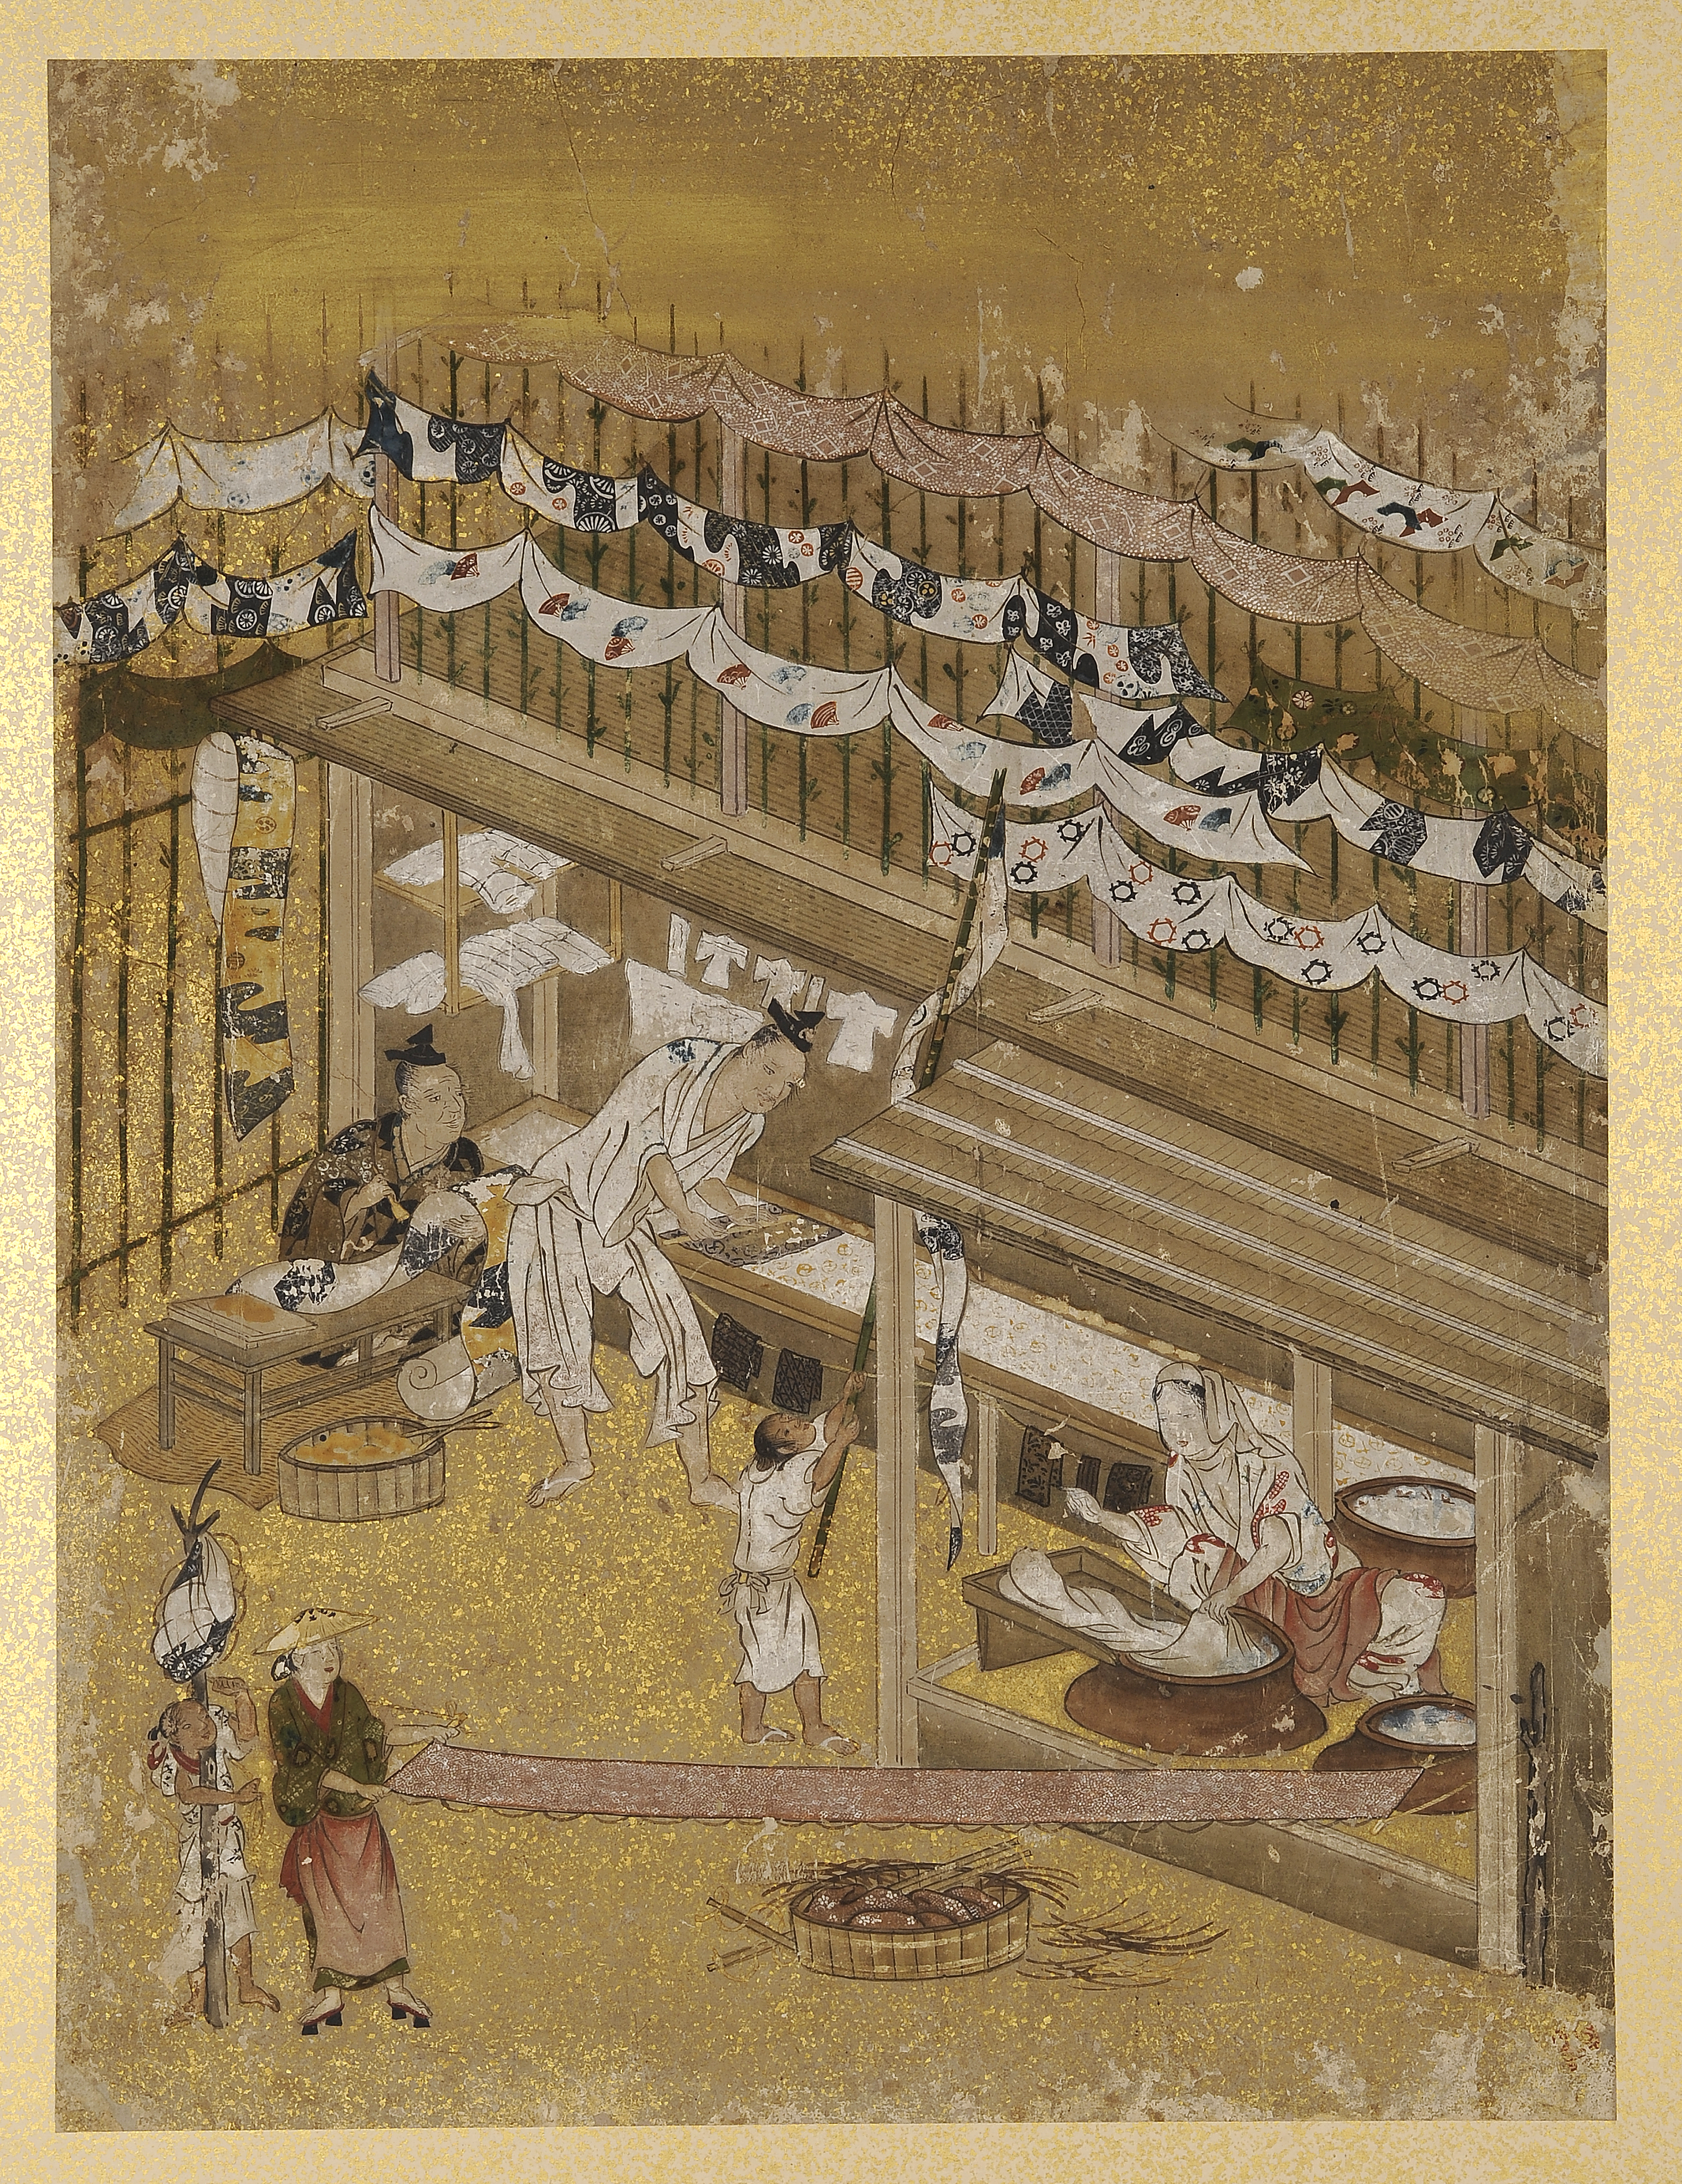 Print showing the several figures working to dye fabric using katagami stencils